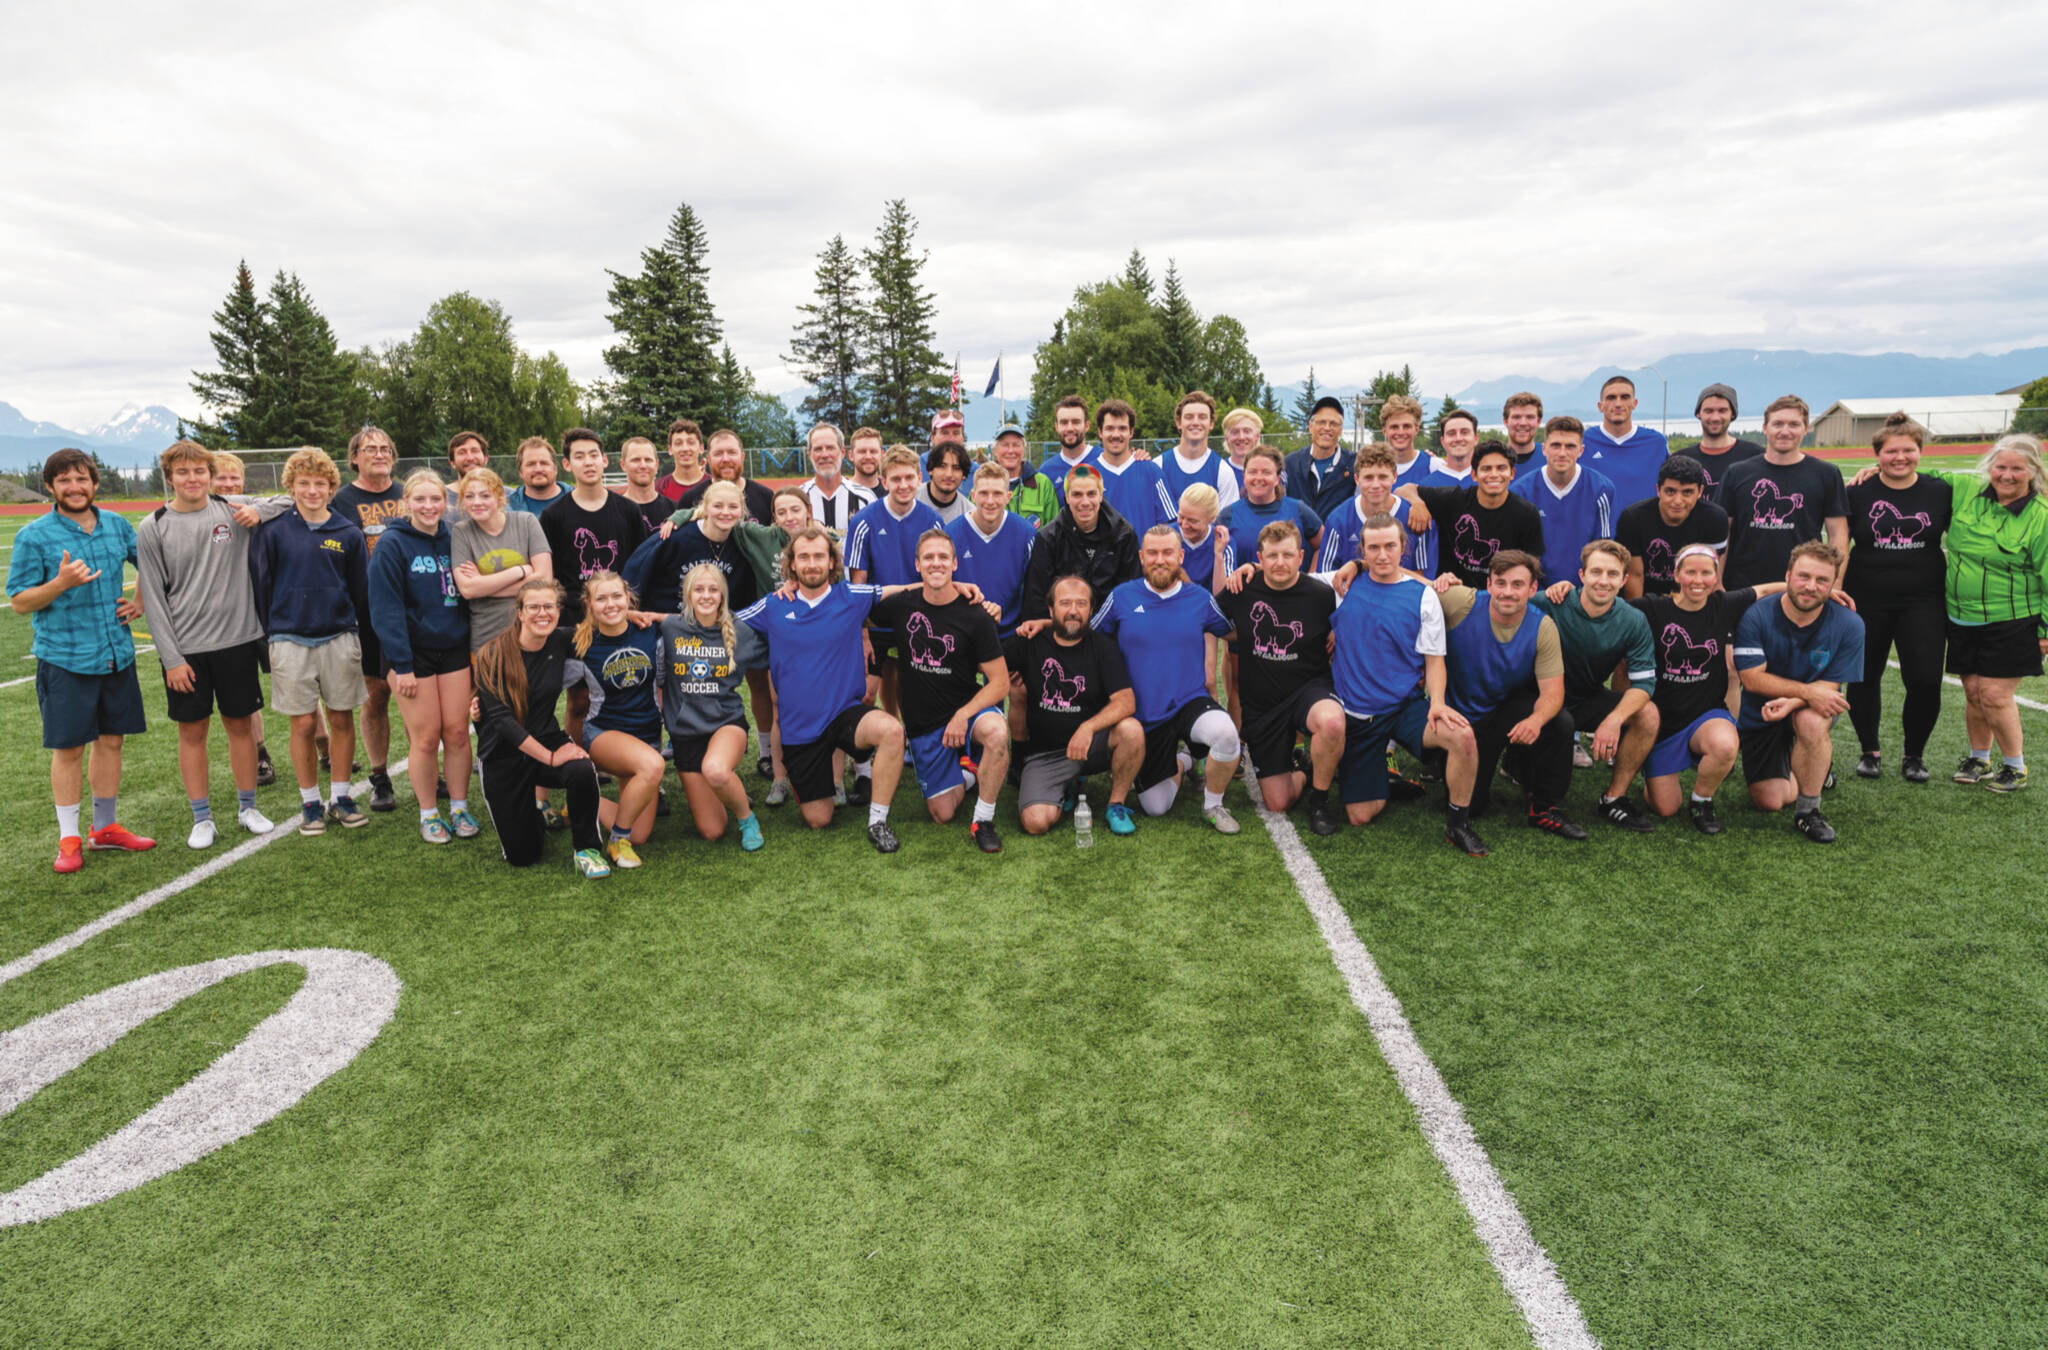 Photo by Uliana Reutov 
Community soccer players after a special match celebrating the life of Drew Brown at Homer High School Field on Aug. 14.